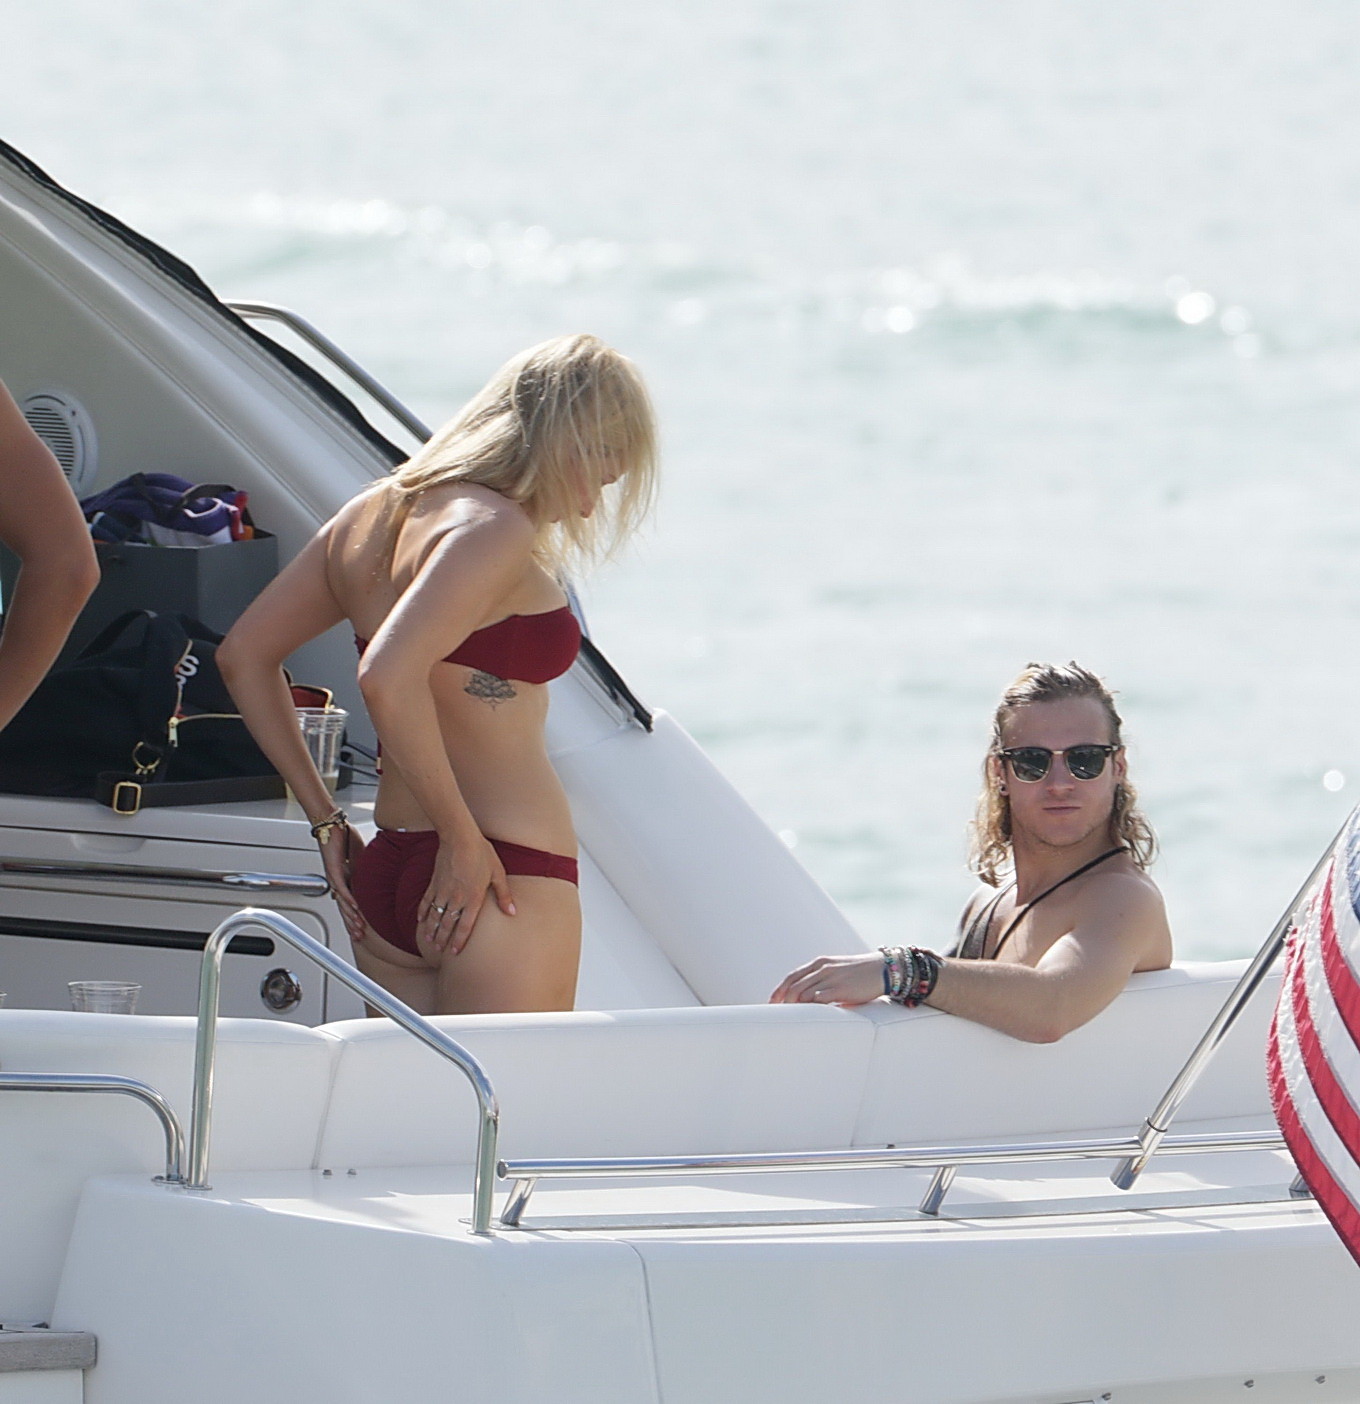 Ellie Goulding showing her ass in skimpy cherry colored bikini at the boat in Mi #75177132